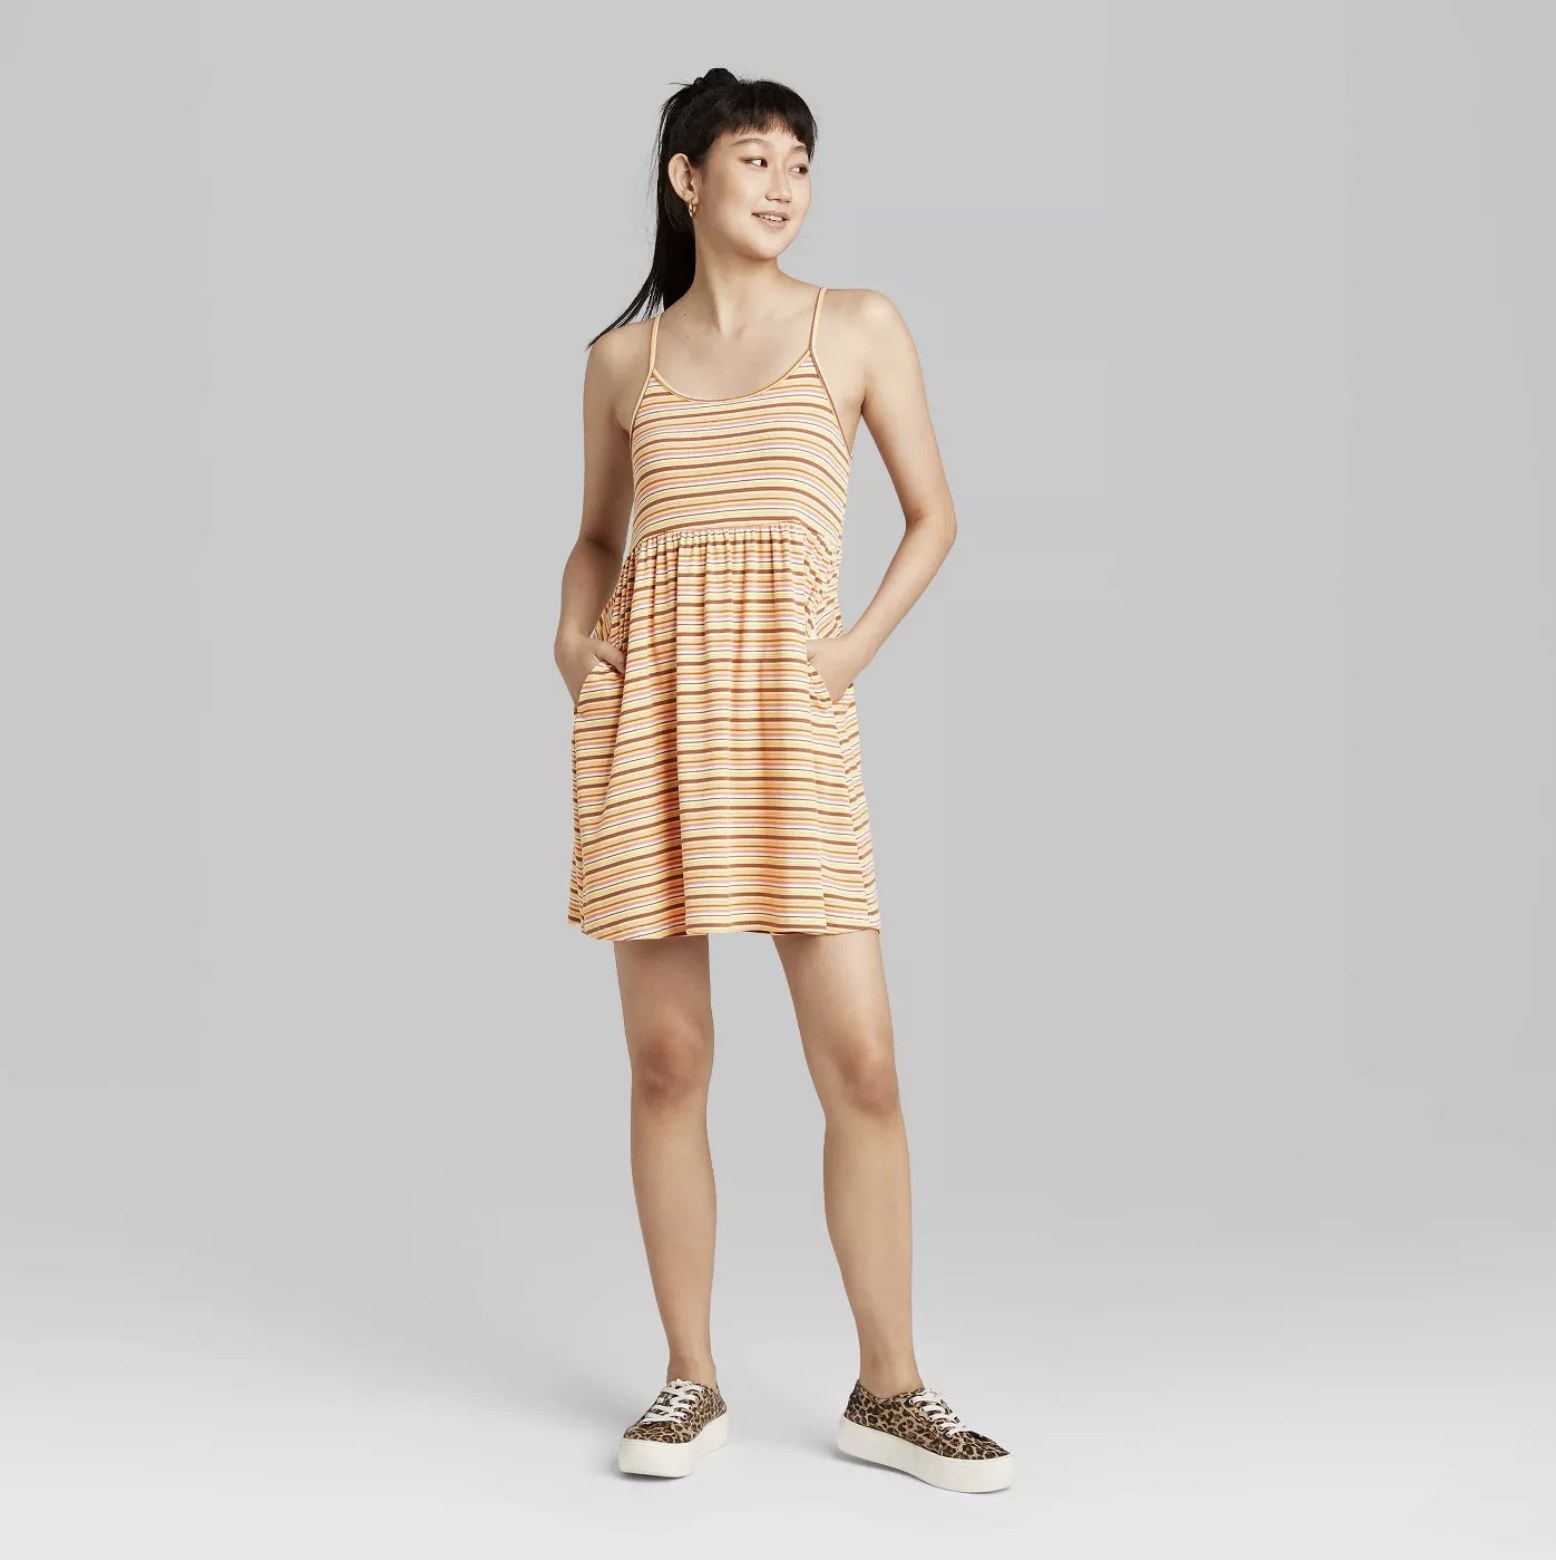 Model is wearing an orange babydoll dress with thin shoulder straps and stripes in different shades of orange